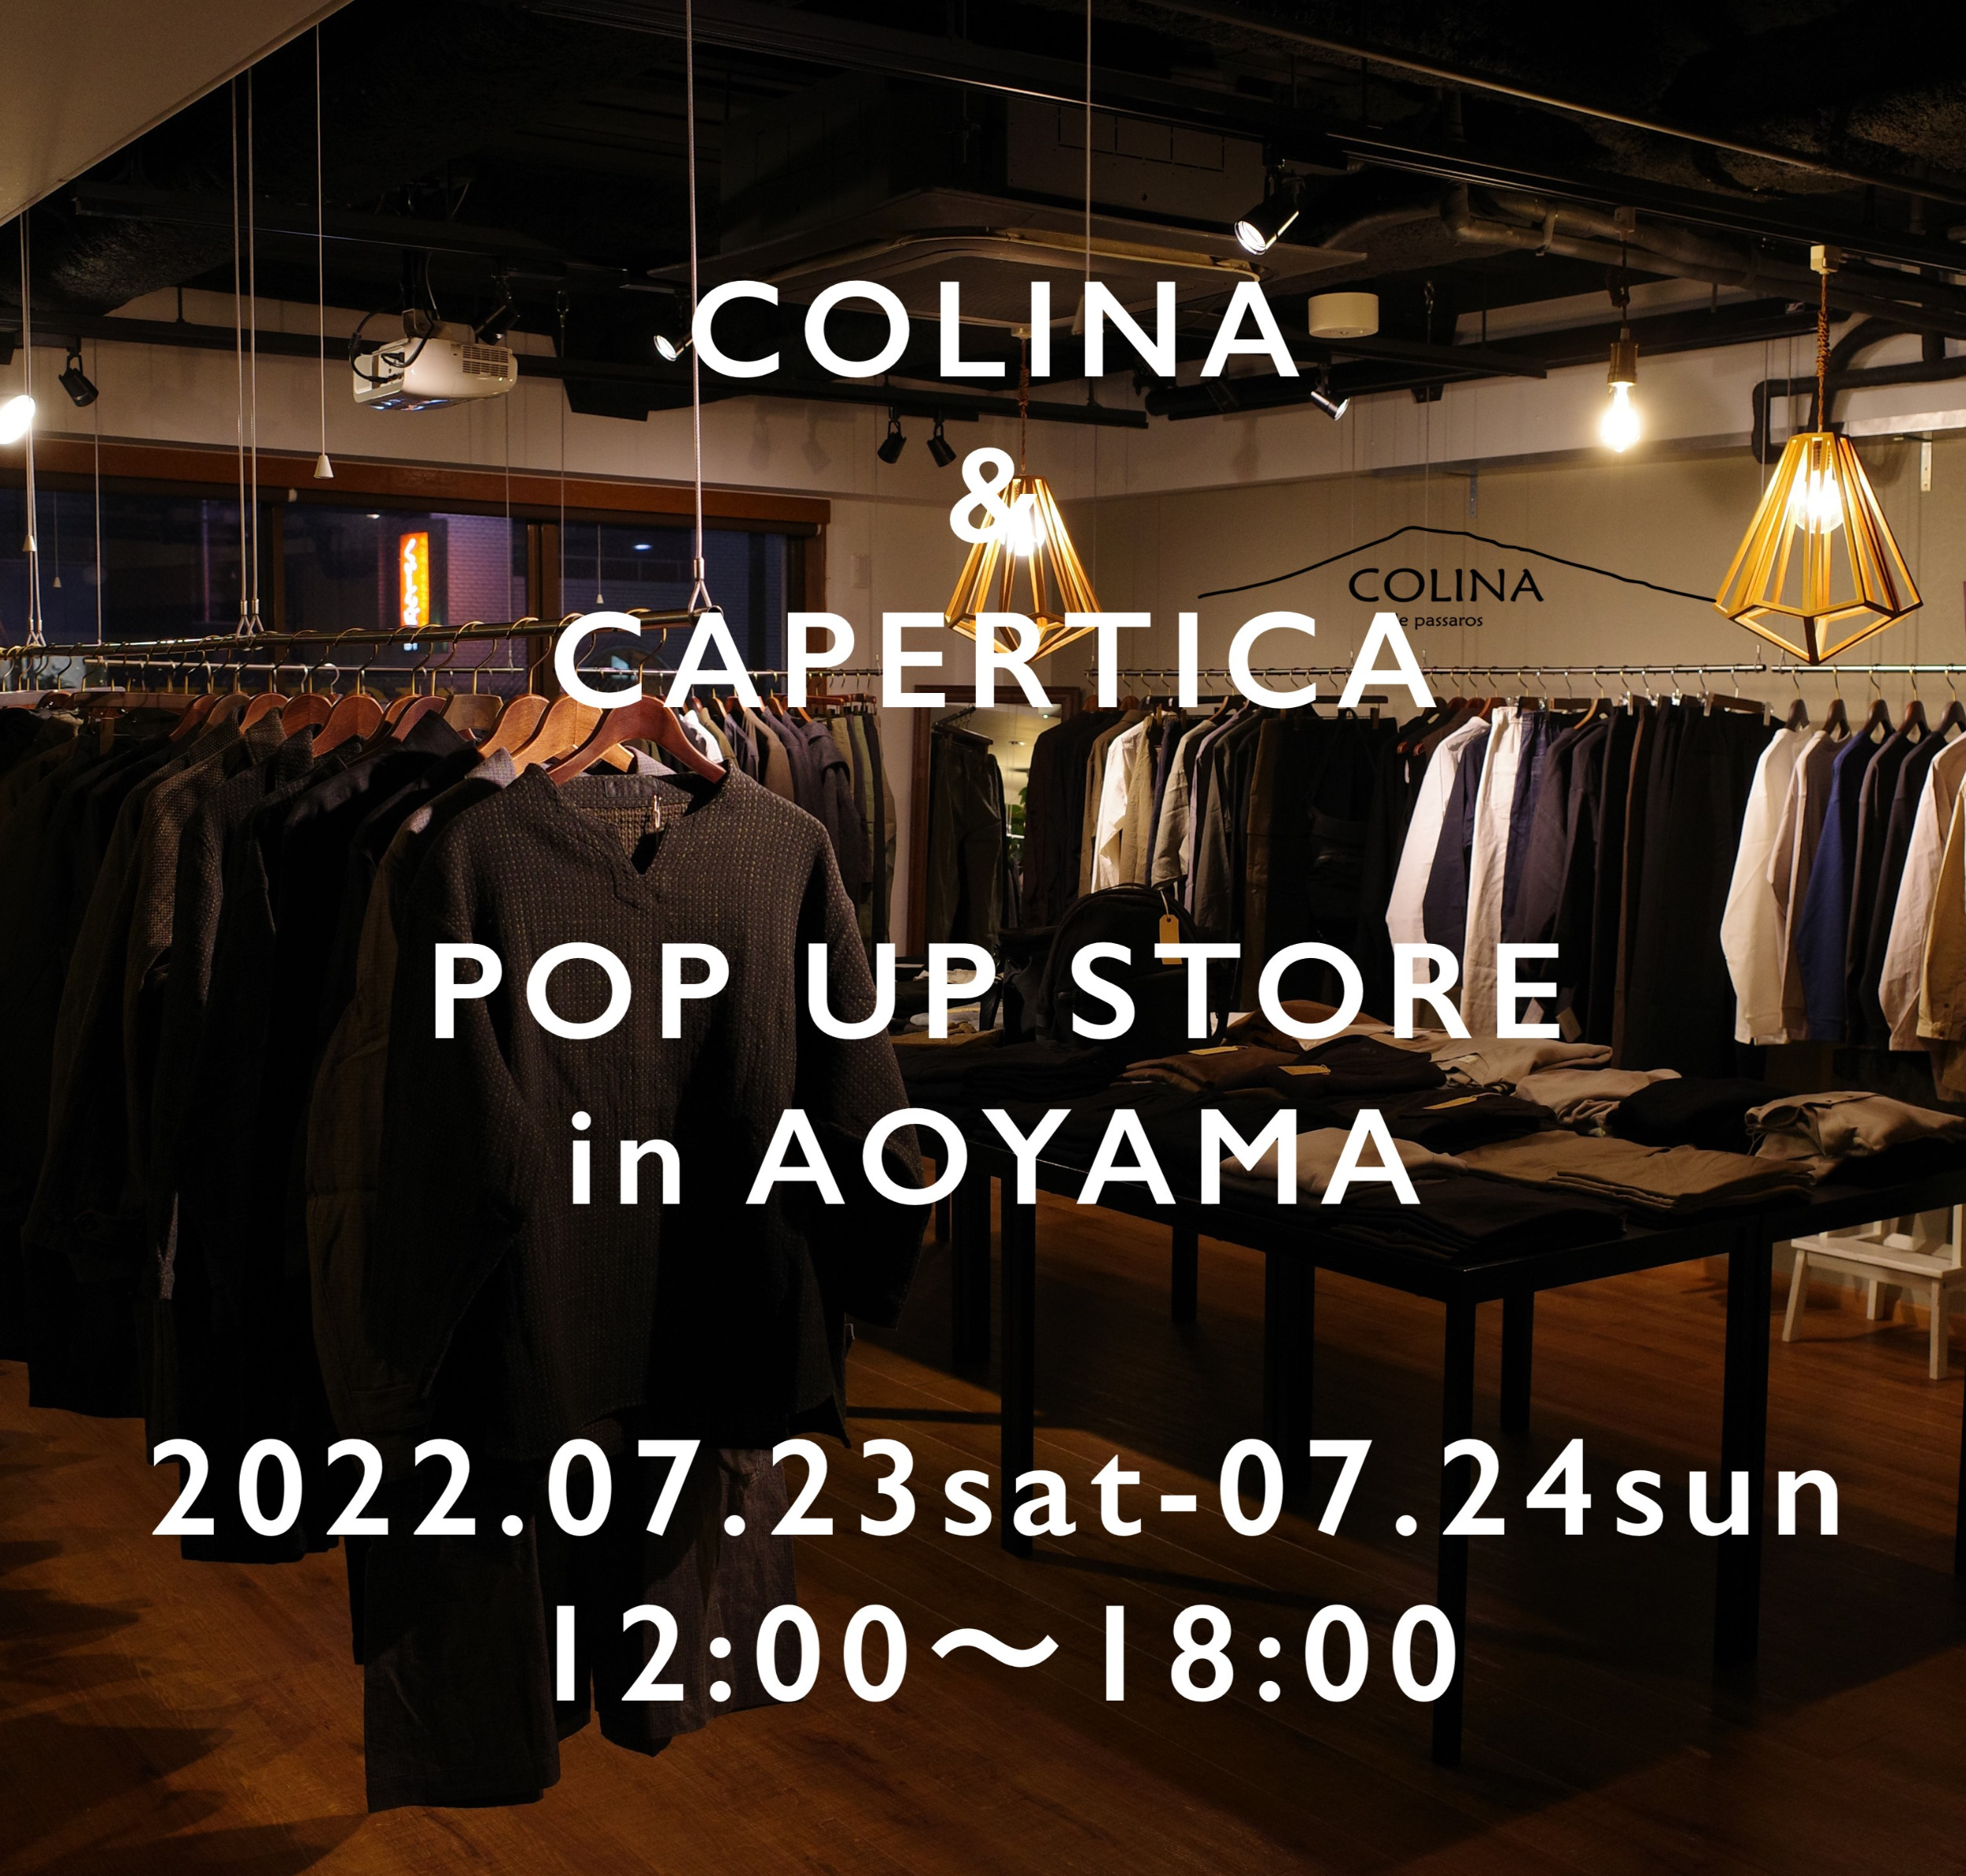 2022.7.23.24　COLINA POP-UP STORE in AOYAMA